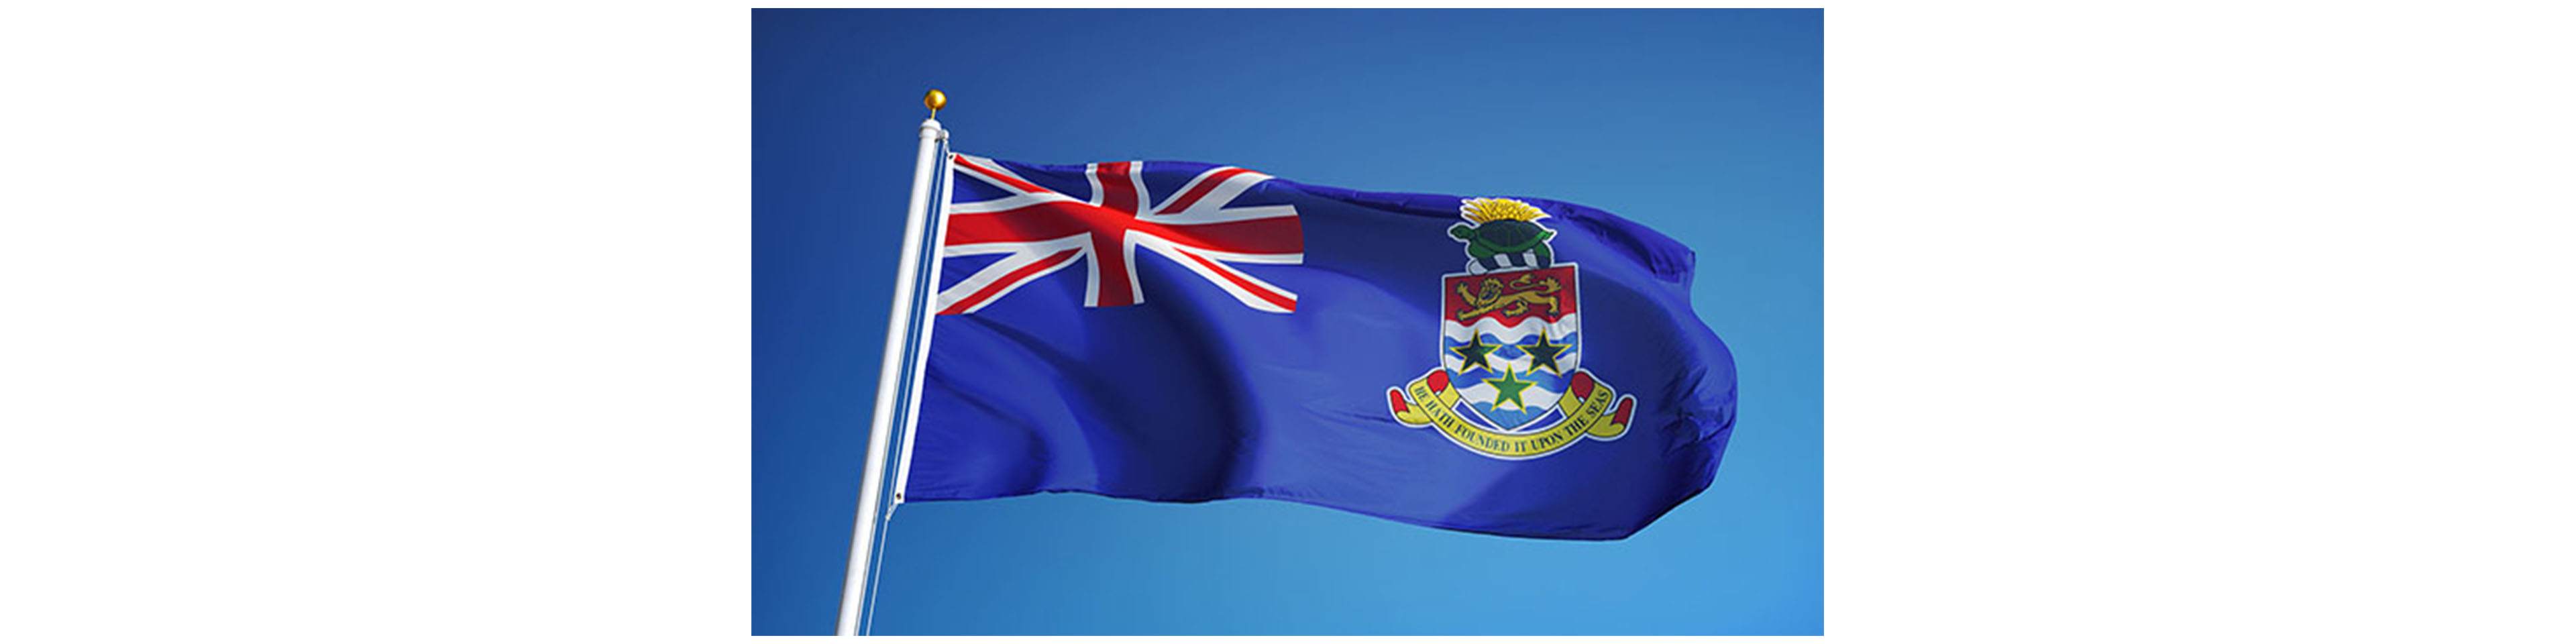 Economic Substance Requirements Now in Effect for the Cayman Islands